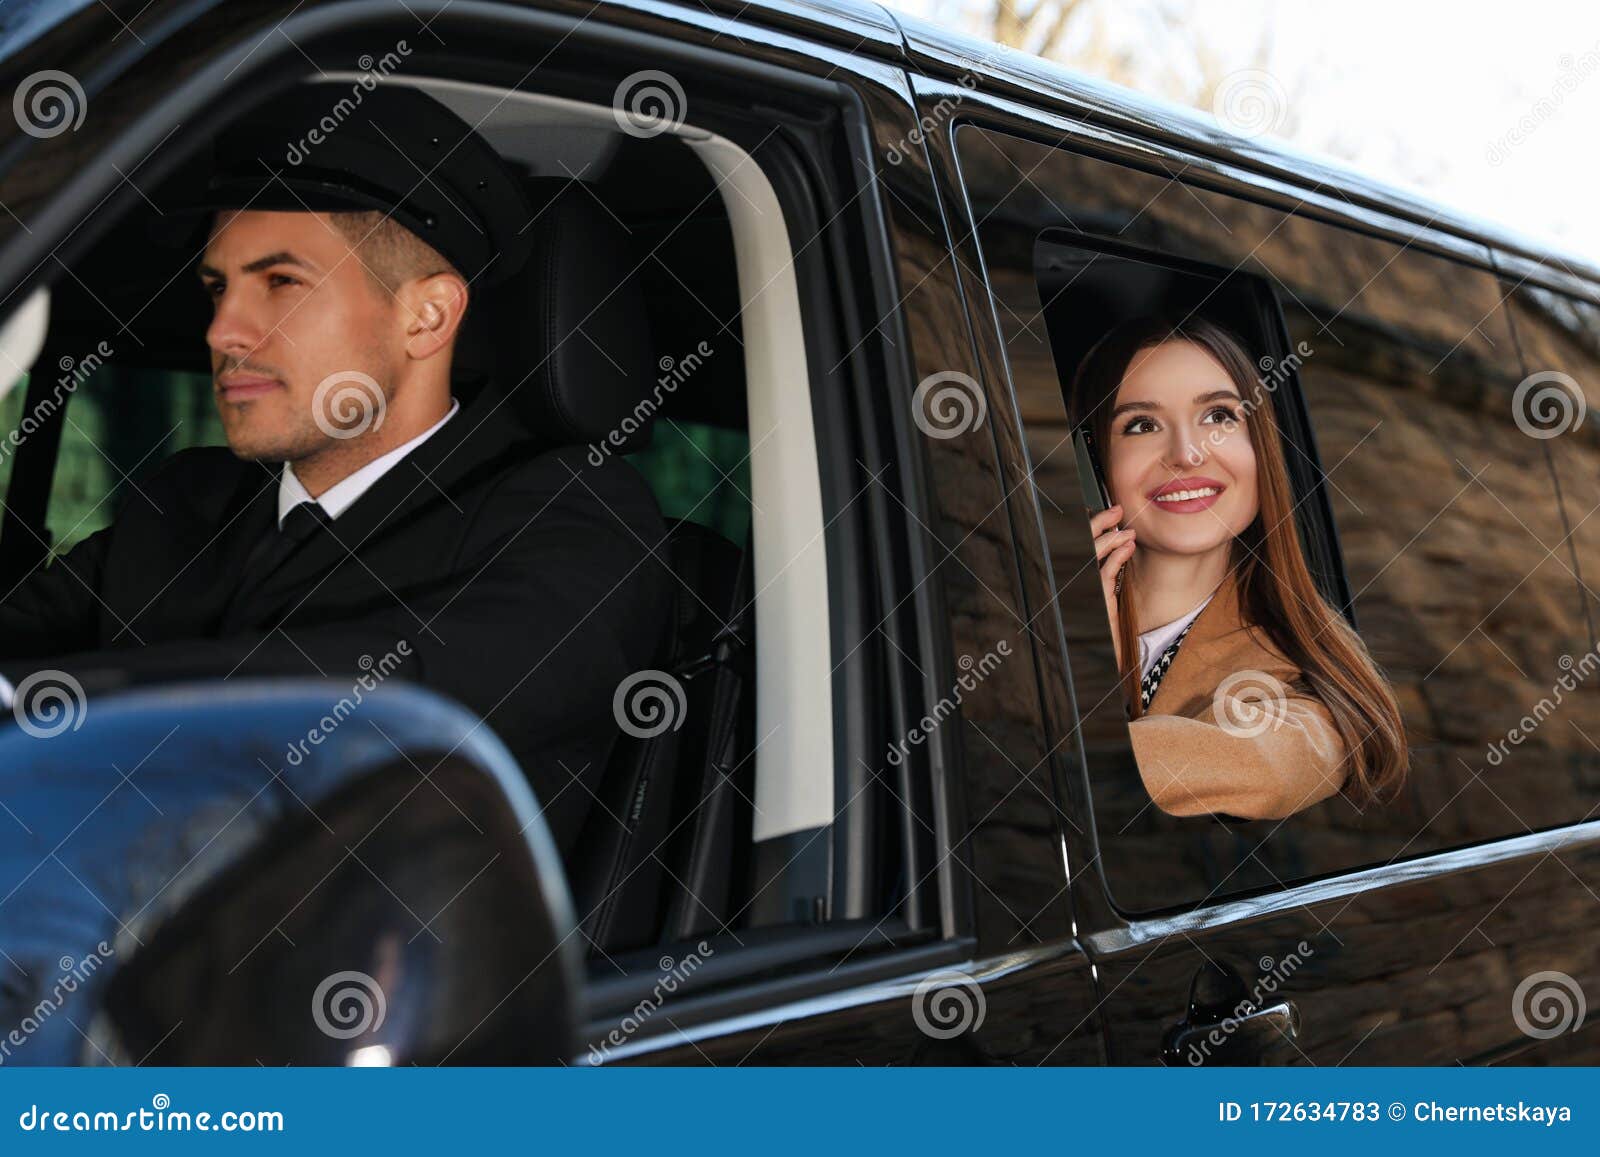 professional driver and businesswoman in car. chauffeur service